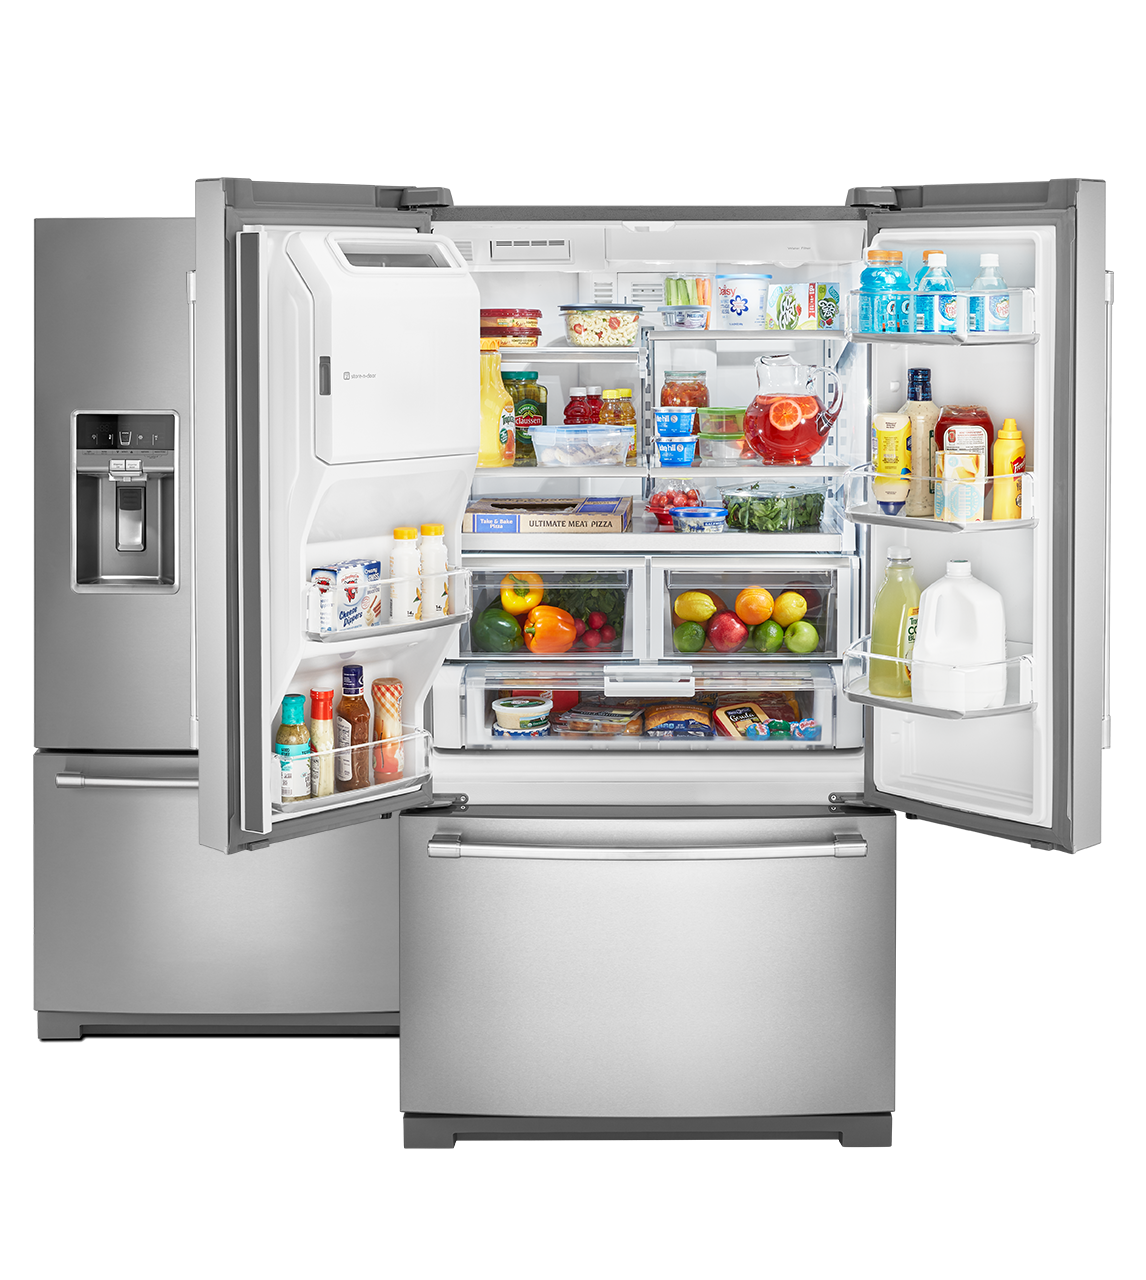 Home Kitchen Appliances PNG Free Image